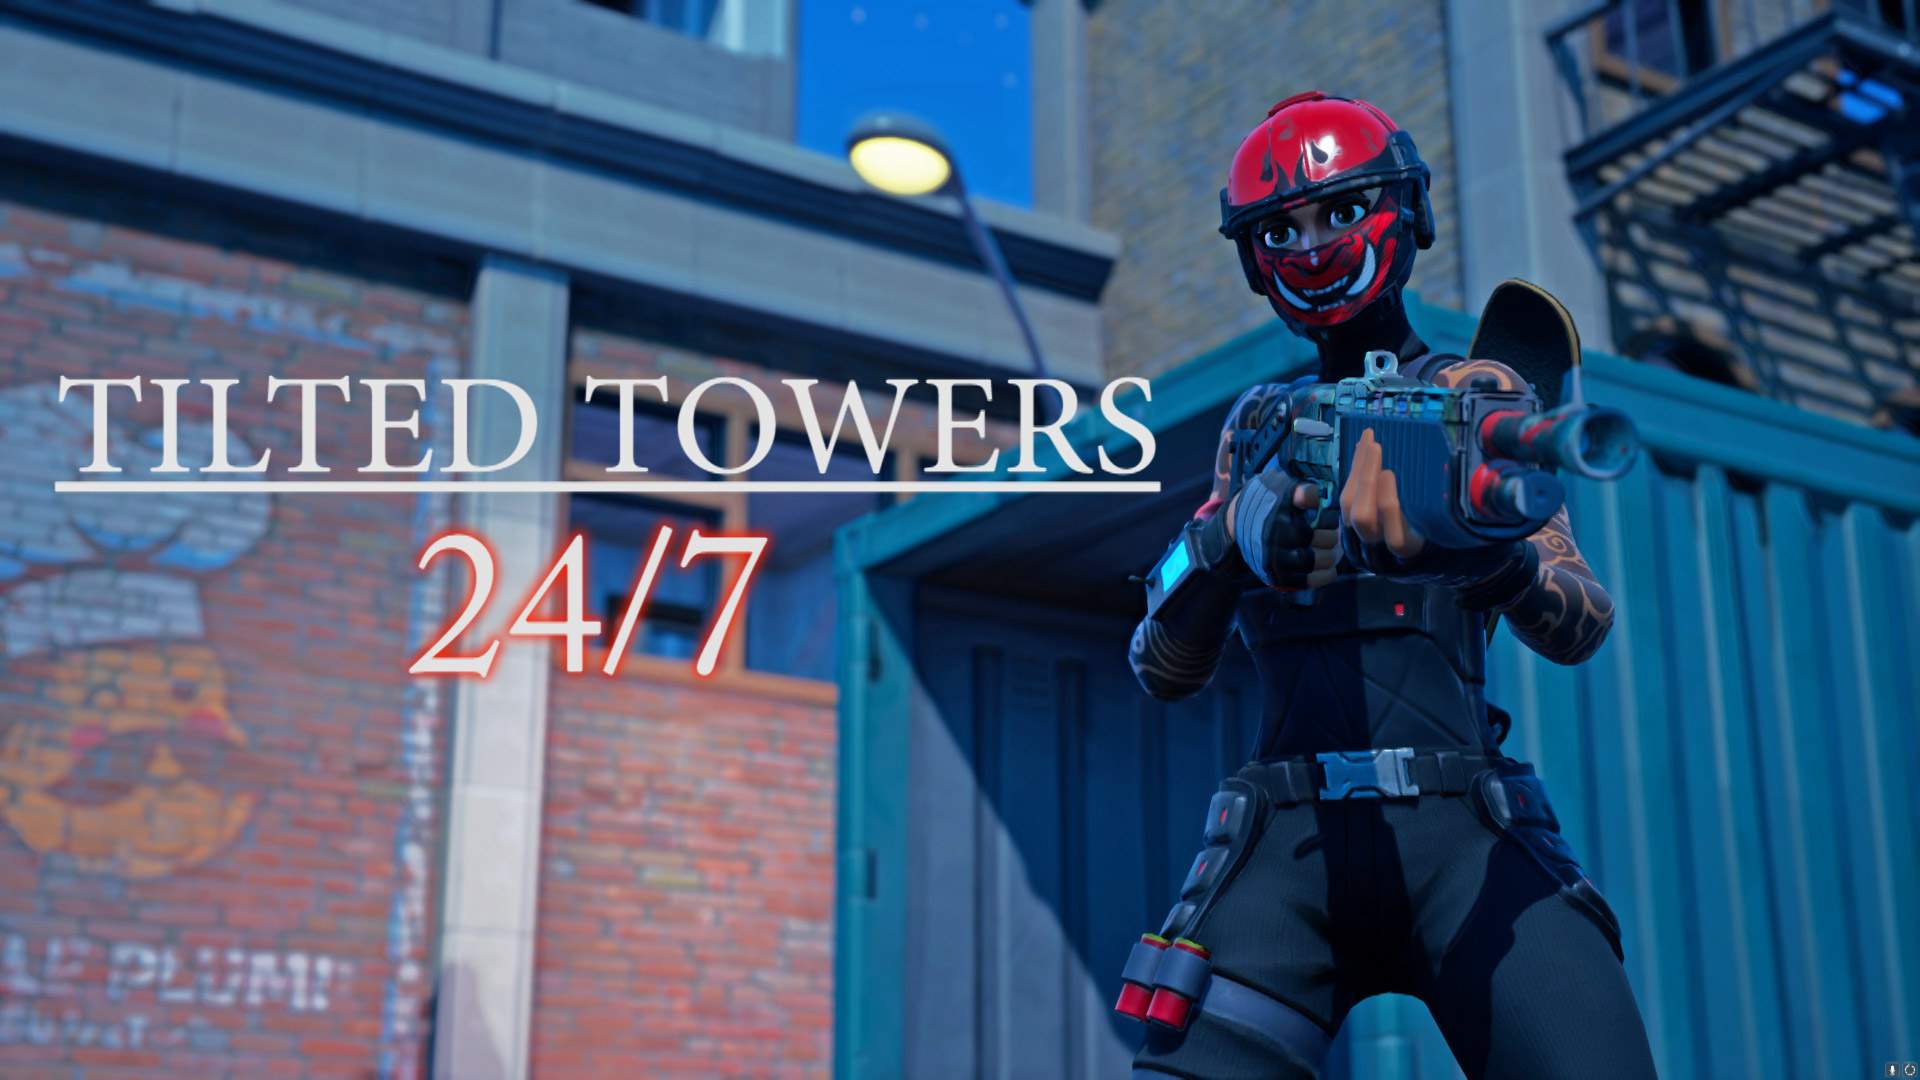 TILTED TOWERS 24/7 - NO BUILD